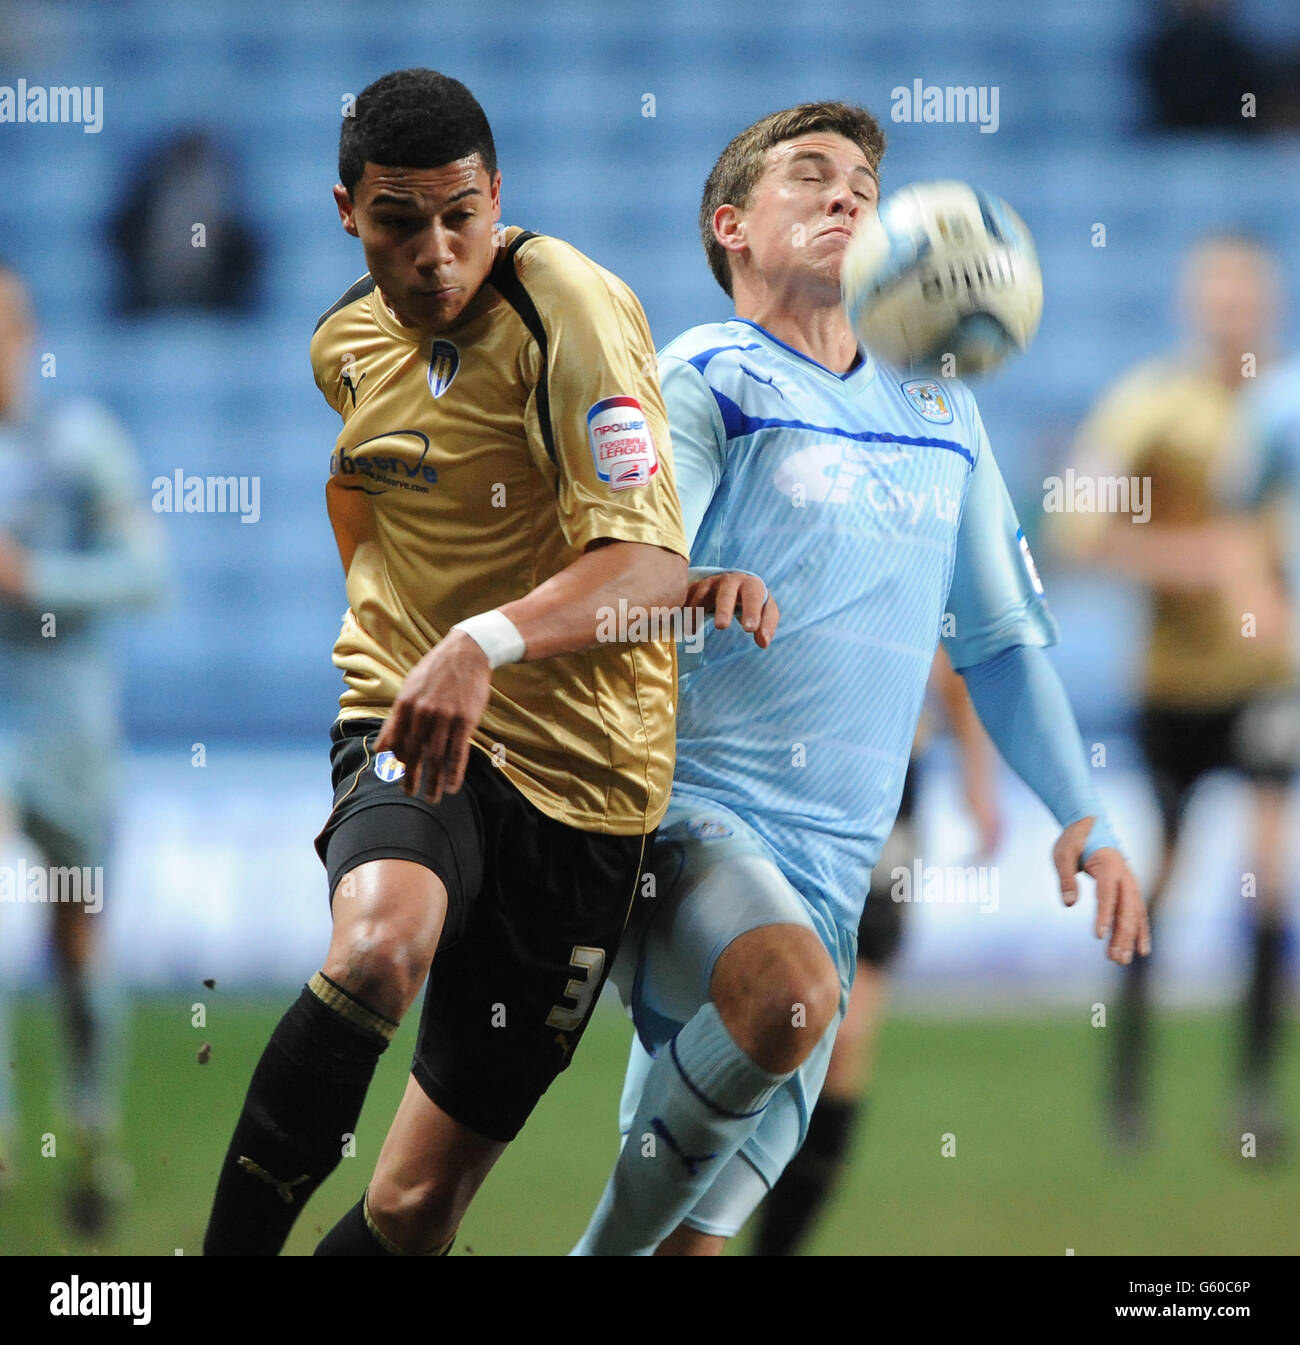 Soccer - npower Football League One - Coventry City v Colchester United - Ricoh Arena. Coventry City's Cody McDonald (right) and Colchester United's Bradley Garmston (left) battle for the ball. Stock Photo